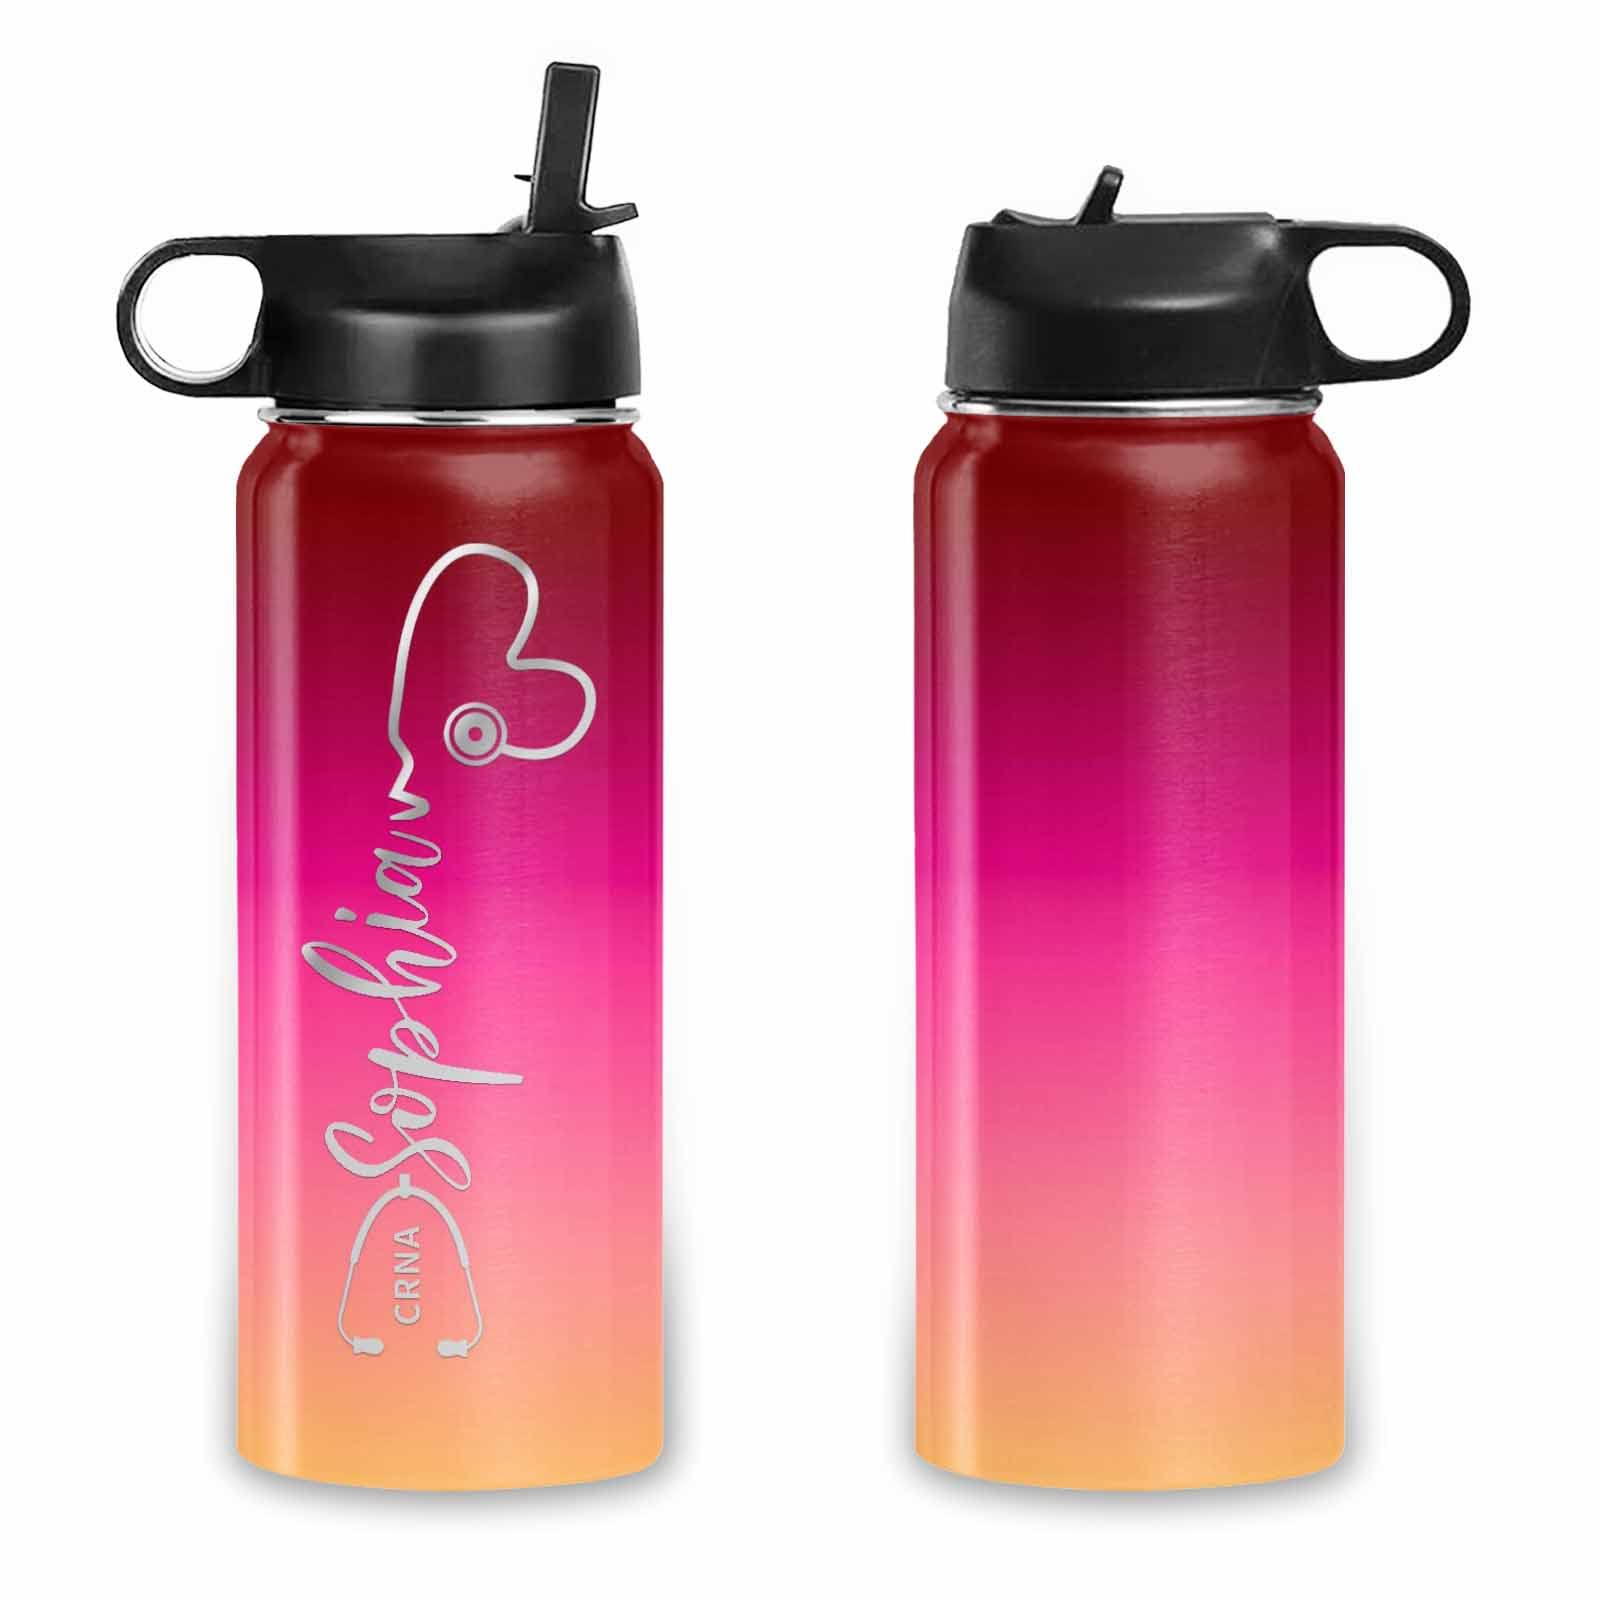 Custom Nurse Water Bottle, Personalized Sports Water Bottle with Name for Nurse Customized Water Bottle with Straw Insulated Stainless Steel Vacuum Cup, Nursing School Students Doctor Gift for Women